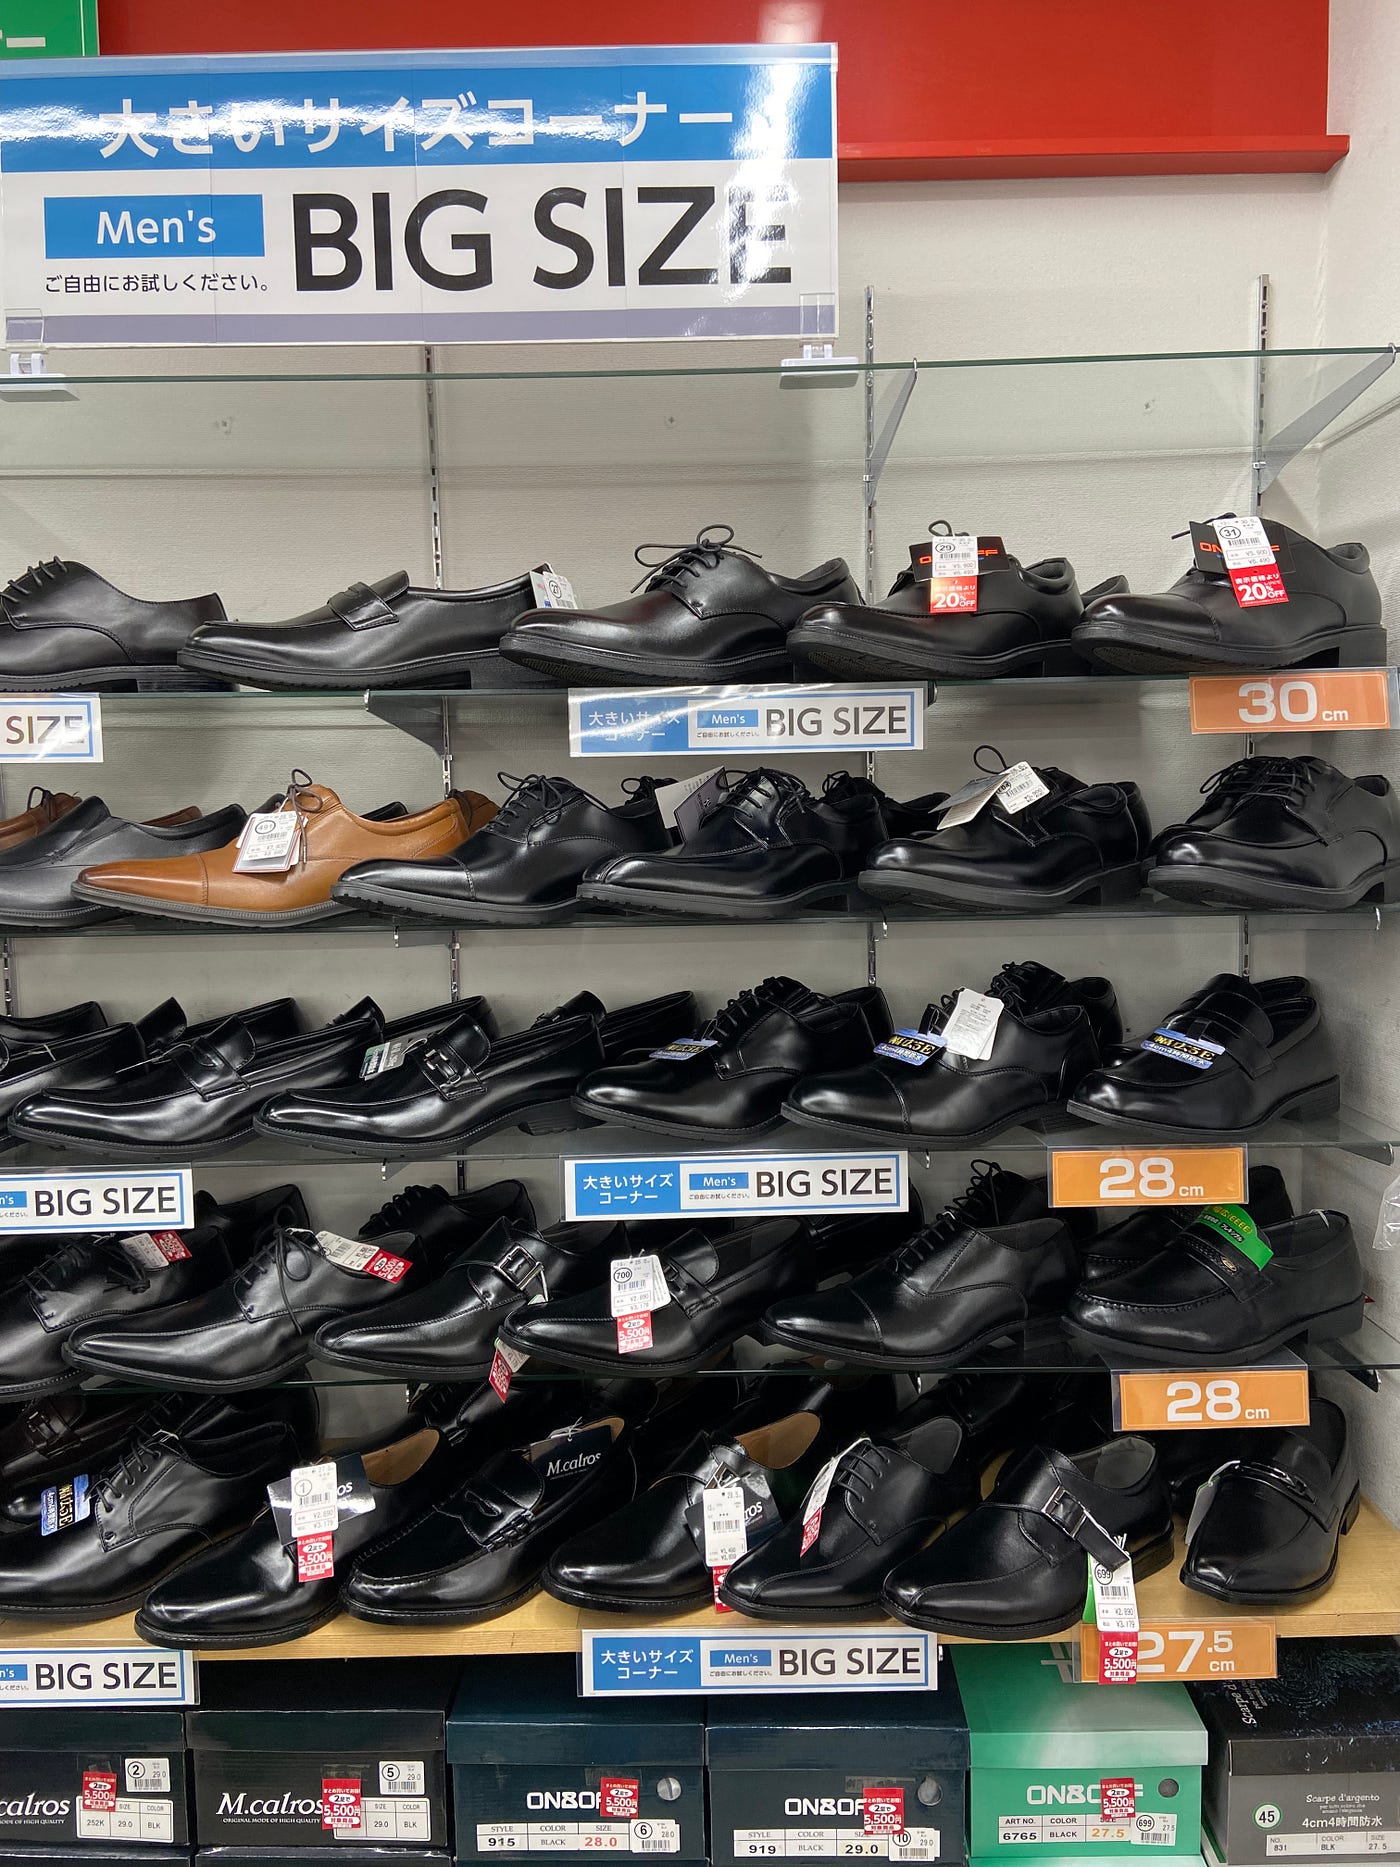 How to Buy Big Shoes in Tokyo Japan | by Japanese Culture & Photography |  Medium